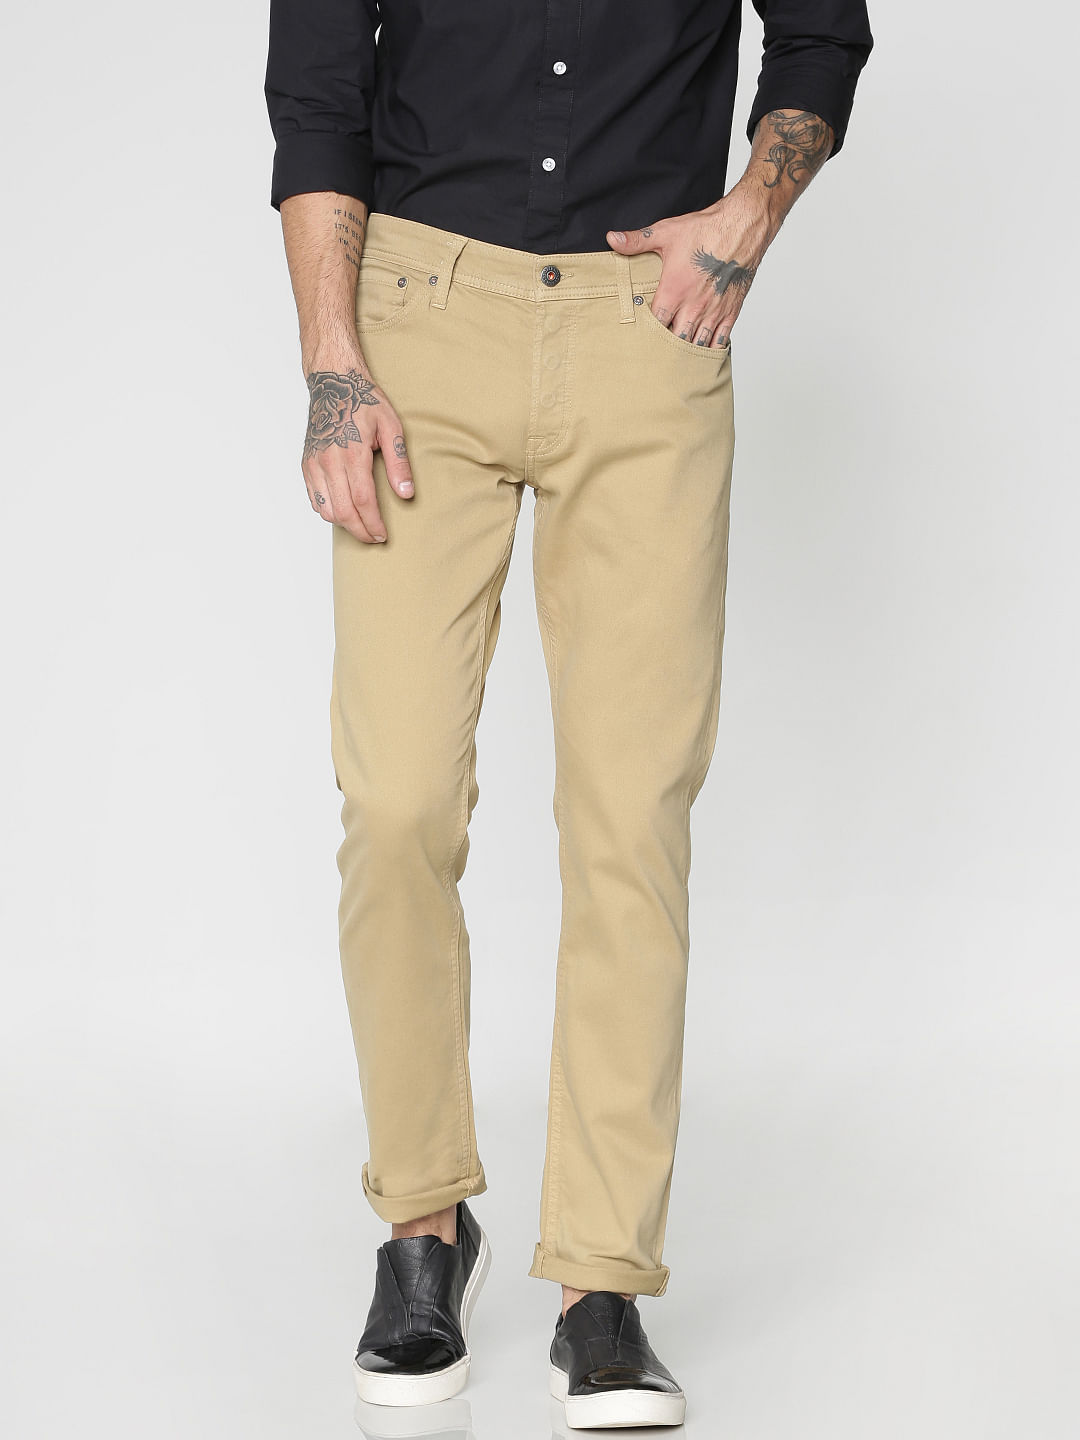 Fit Guide  Dickies Trousers  Flatspot